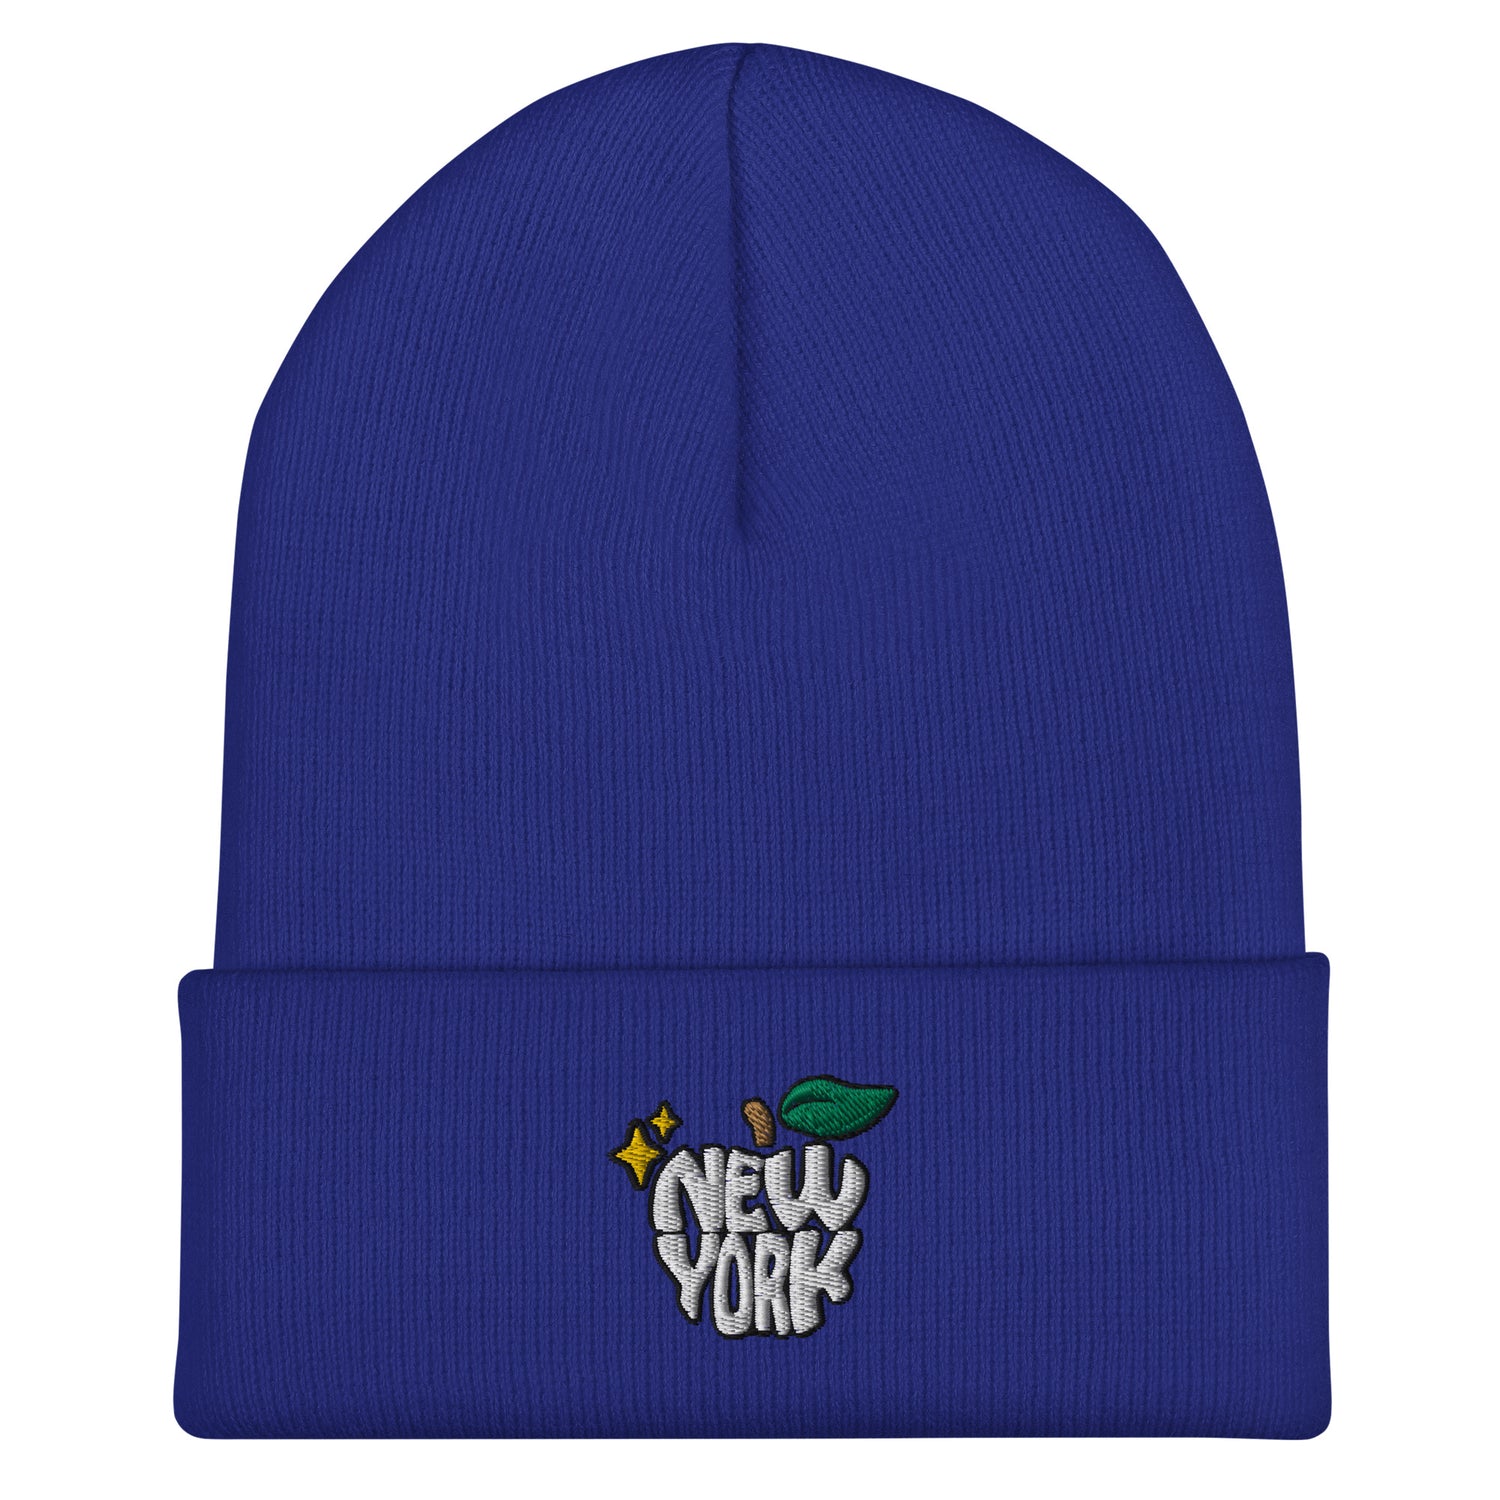 New York Apple Logo Embroidered Royal Blue Cuffed Beanie Hat Scattered Streetwear